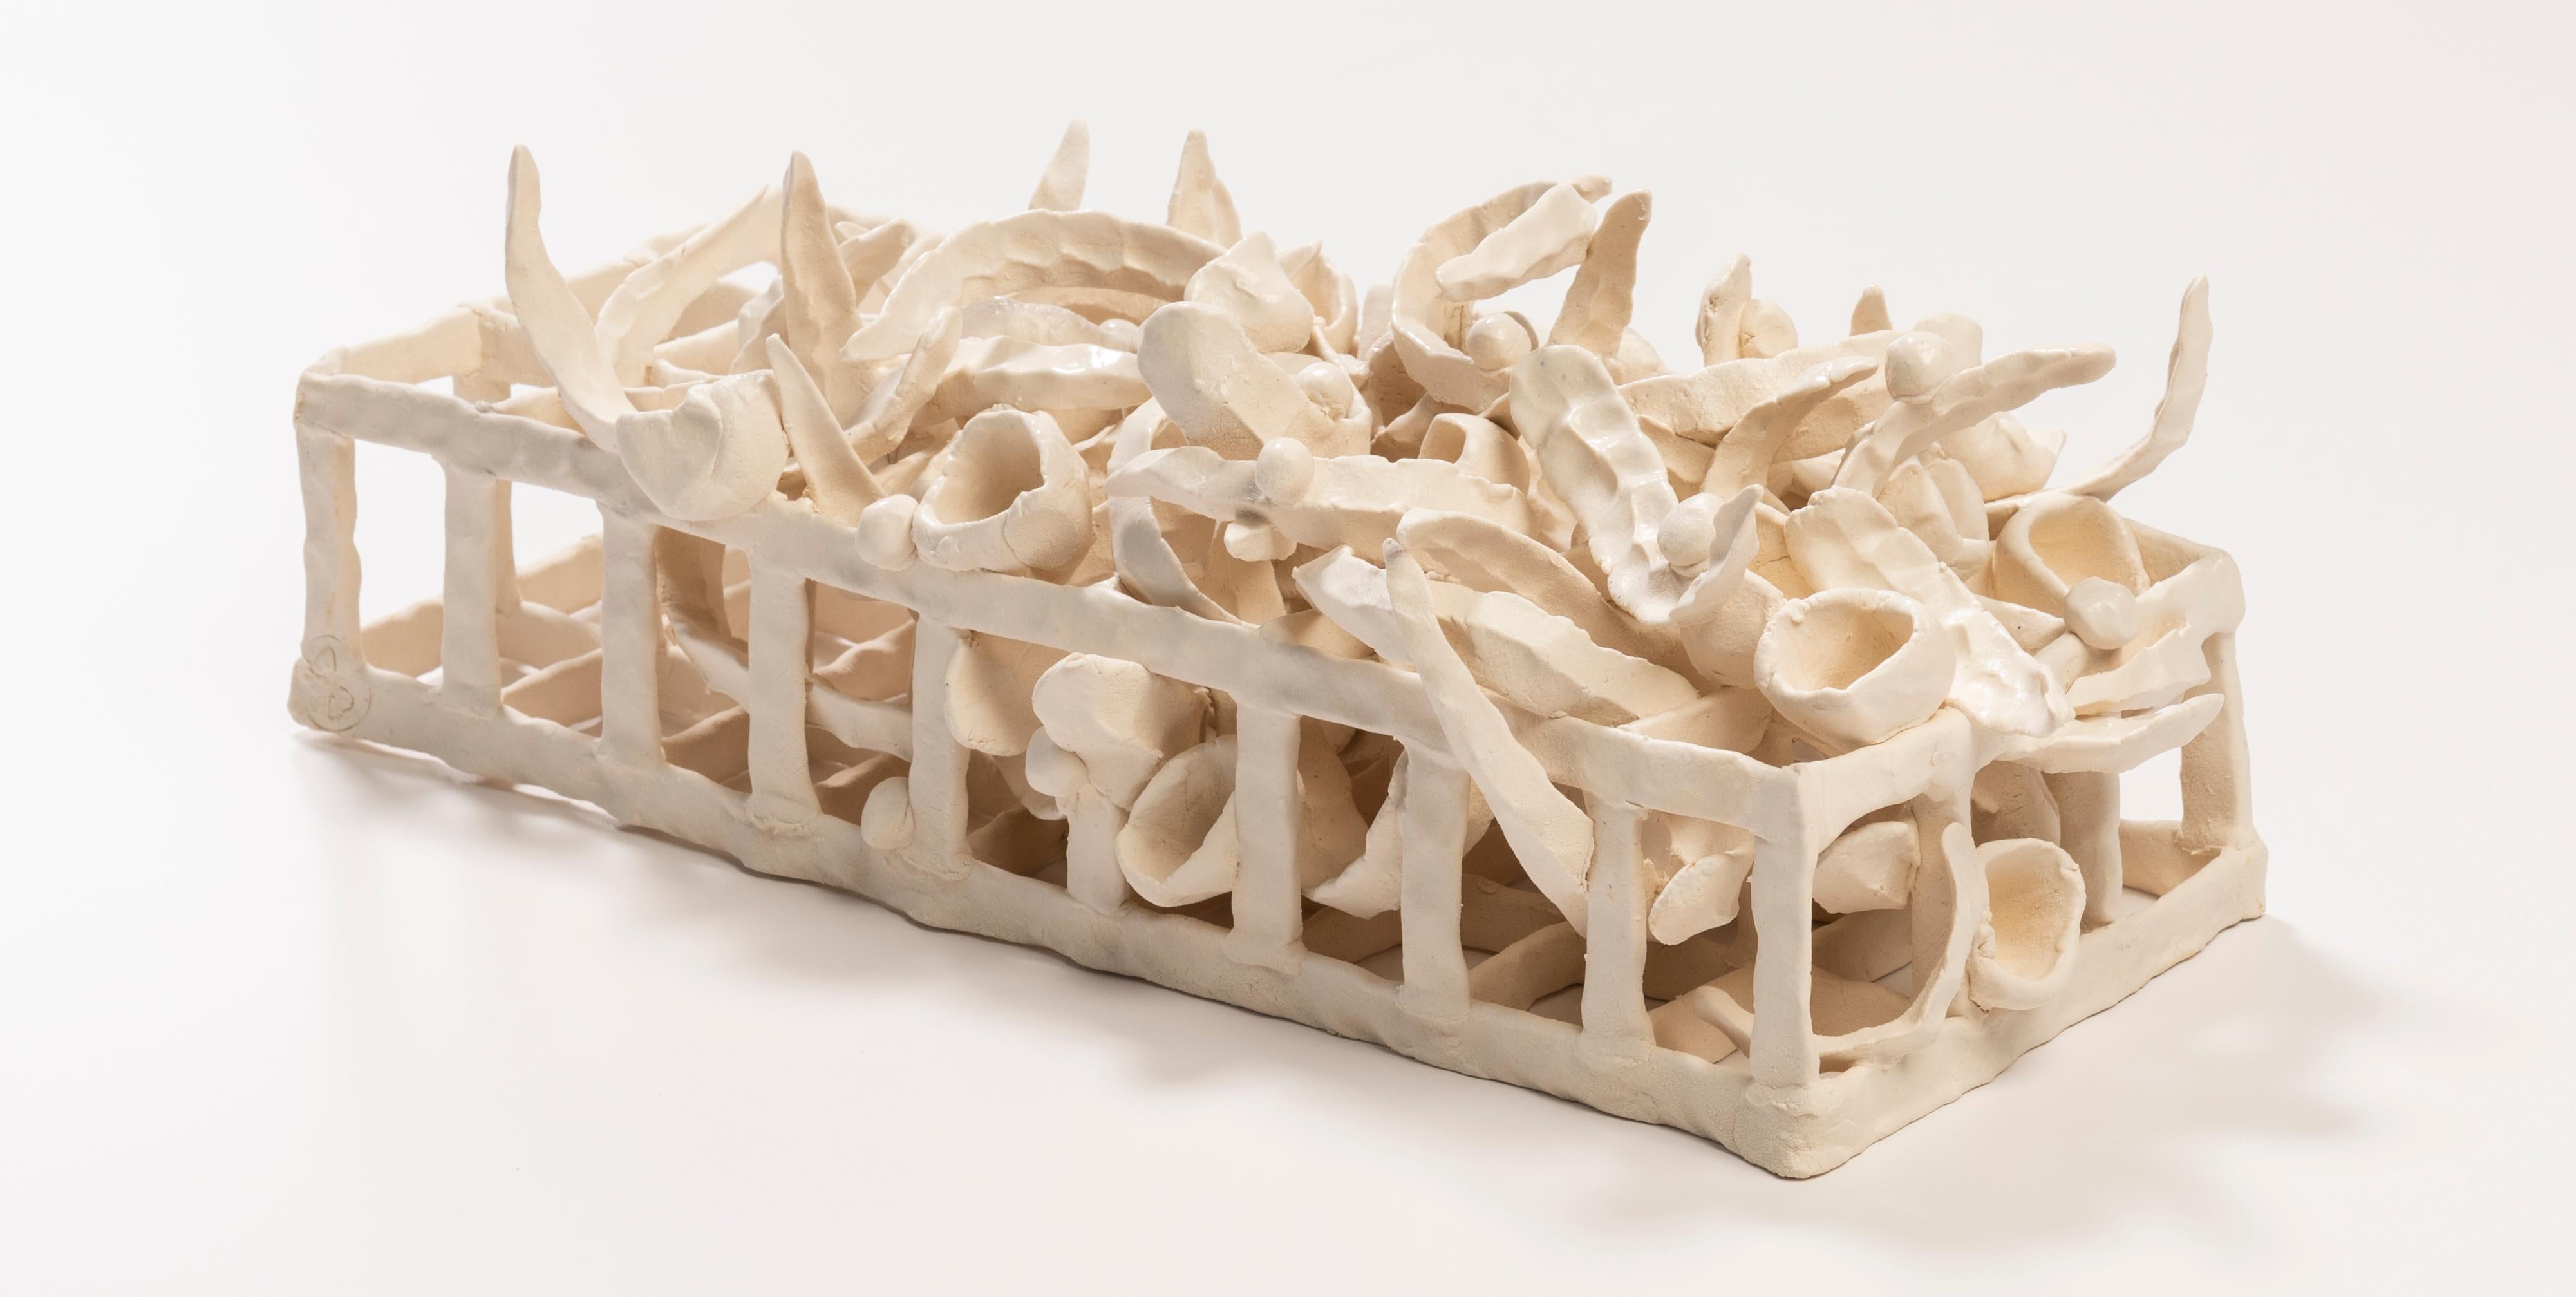 Joanna Poag Binding Time (Grid with Pods and Leaves) Ceramic Sculpture, 2019 In Excellent Condition For Sale In New York, NY